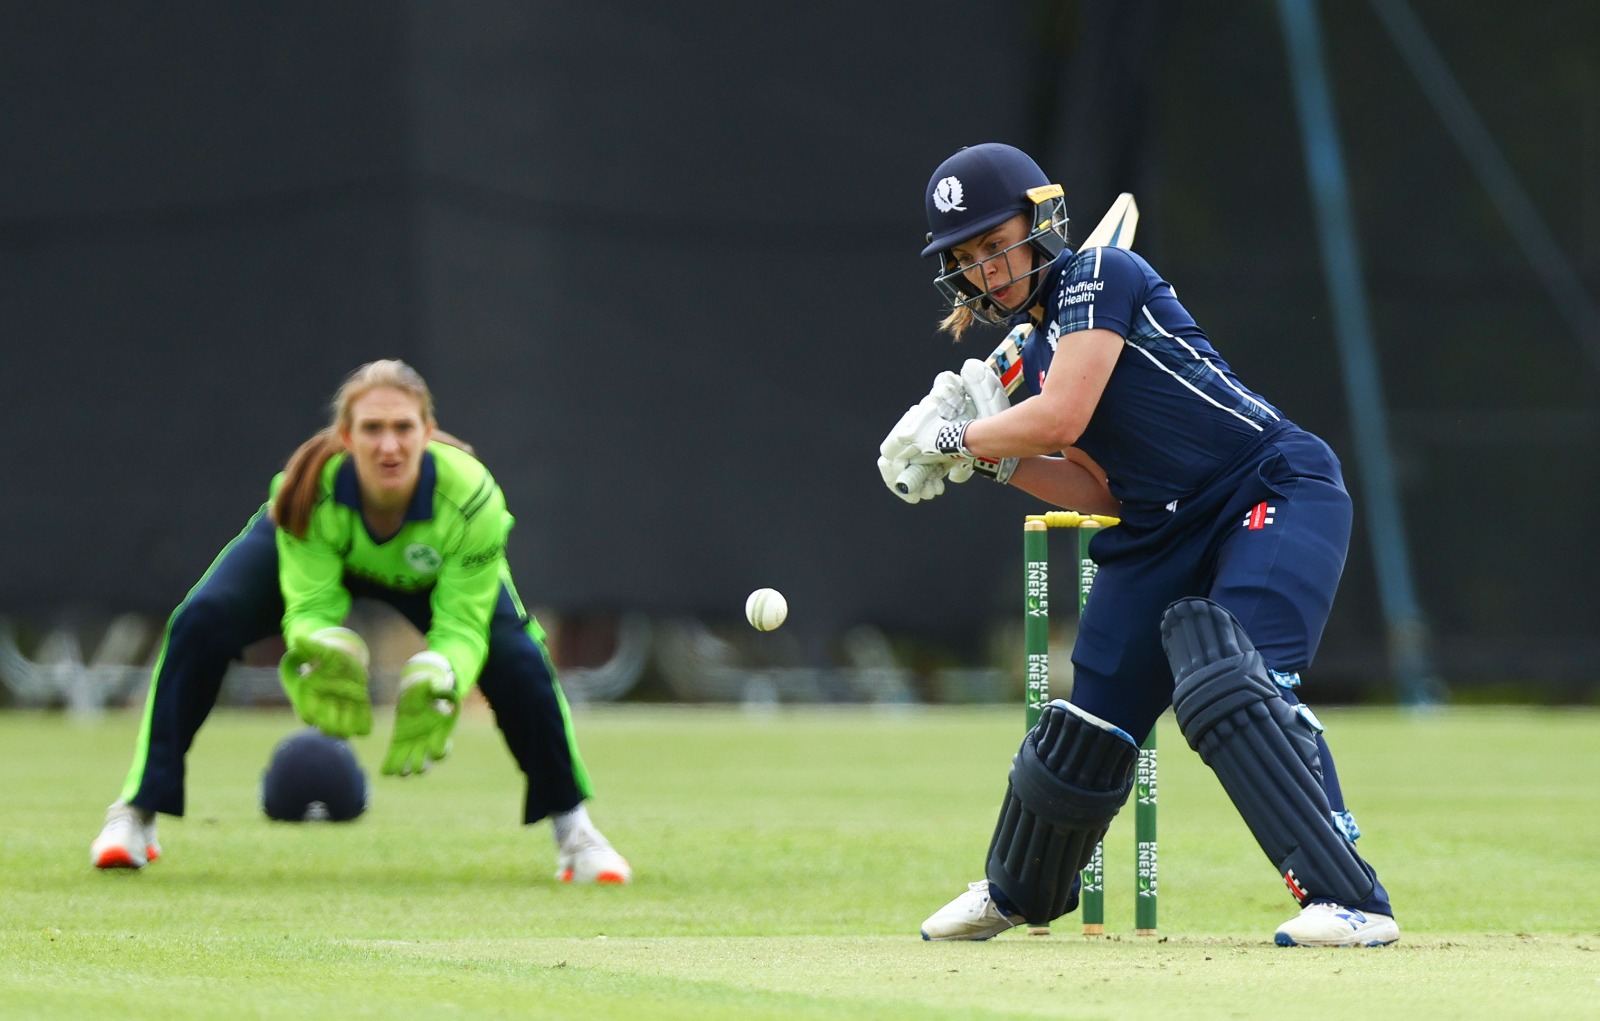 SCOTLAND WOMEN A TO COMPETE IN FINALS DAY